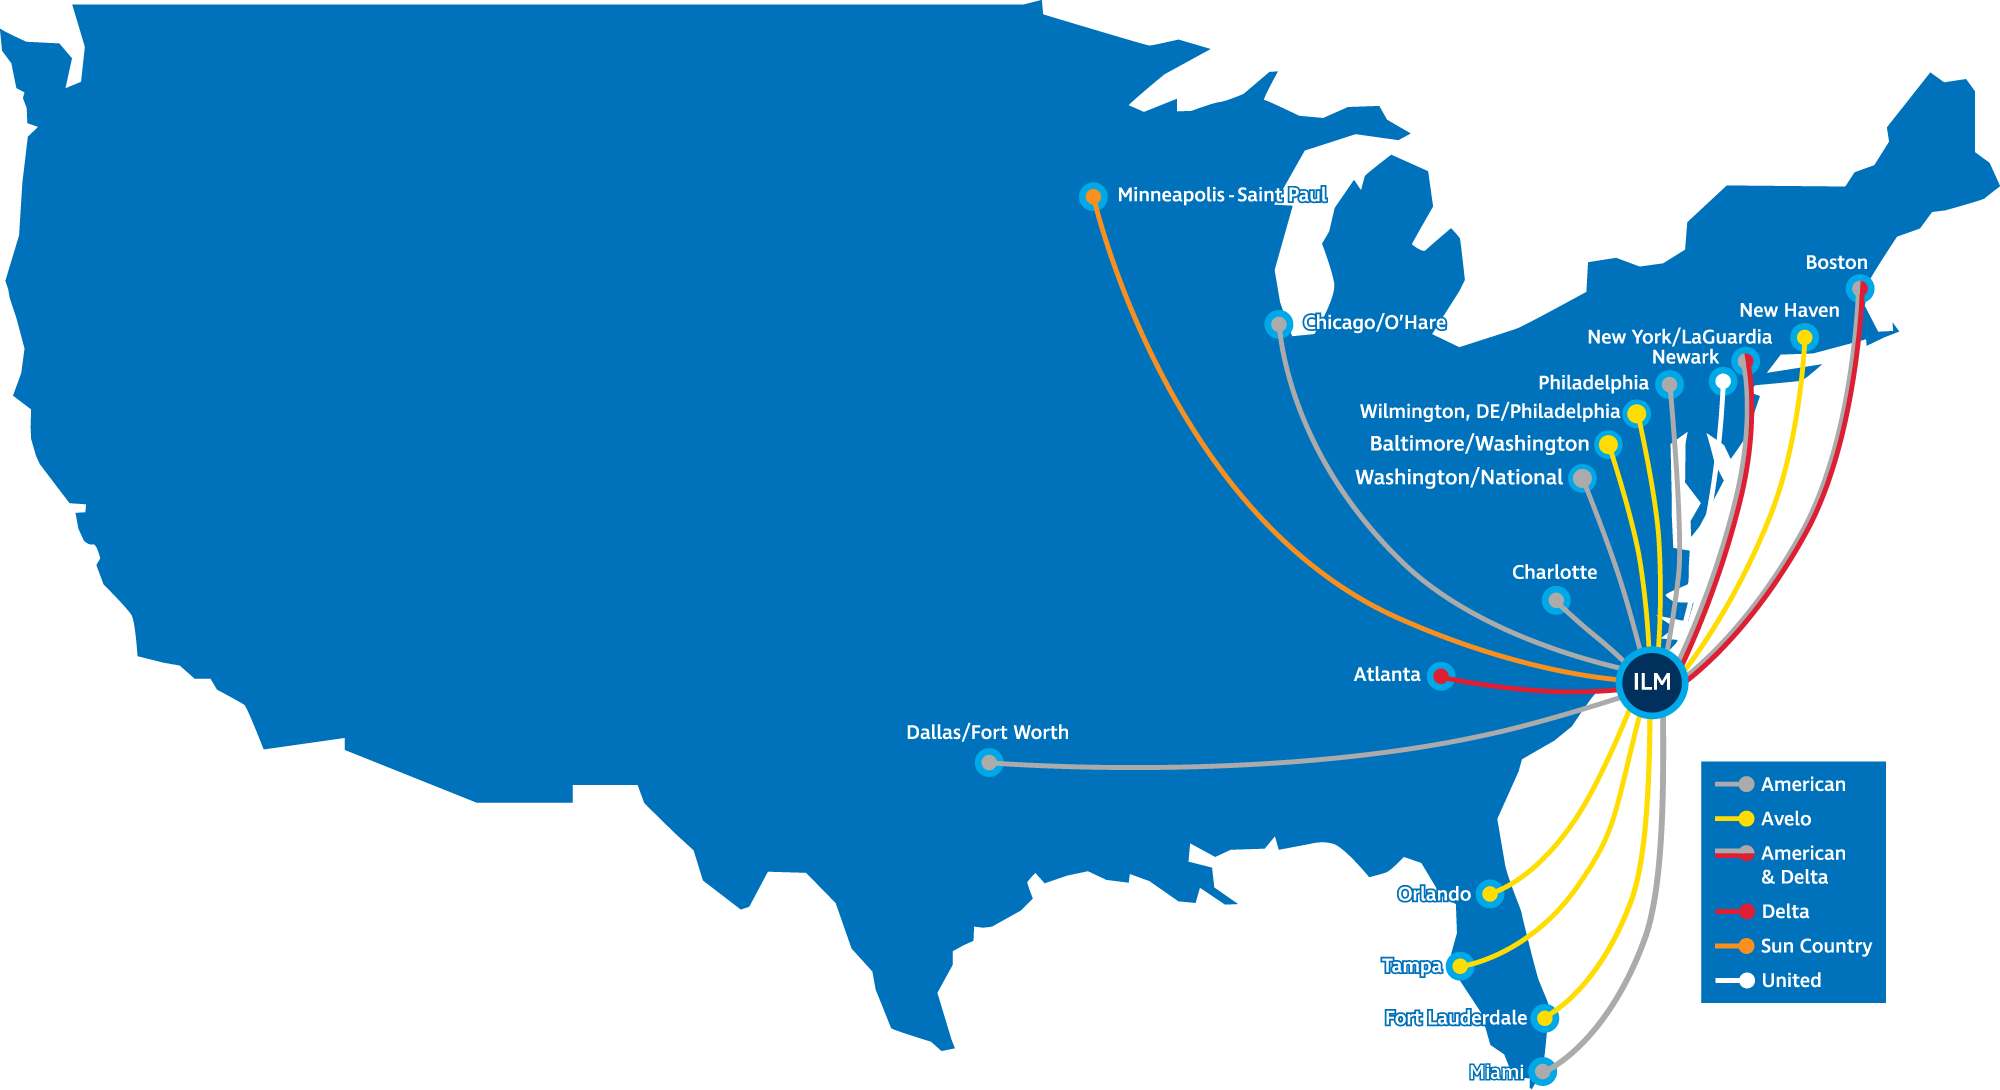 Map of United States with nonstop flight destinations